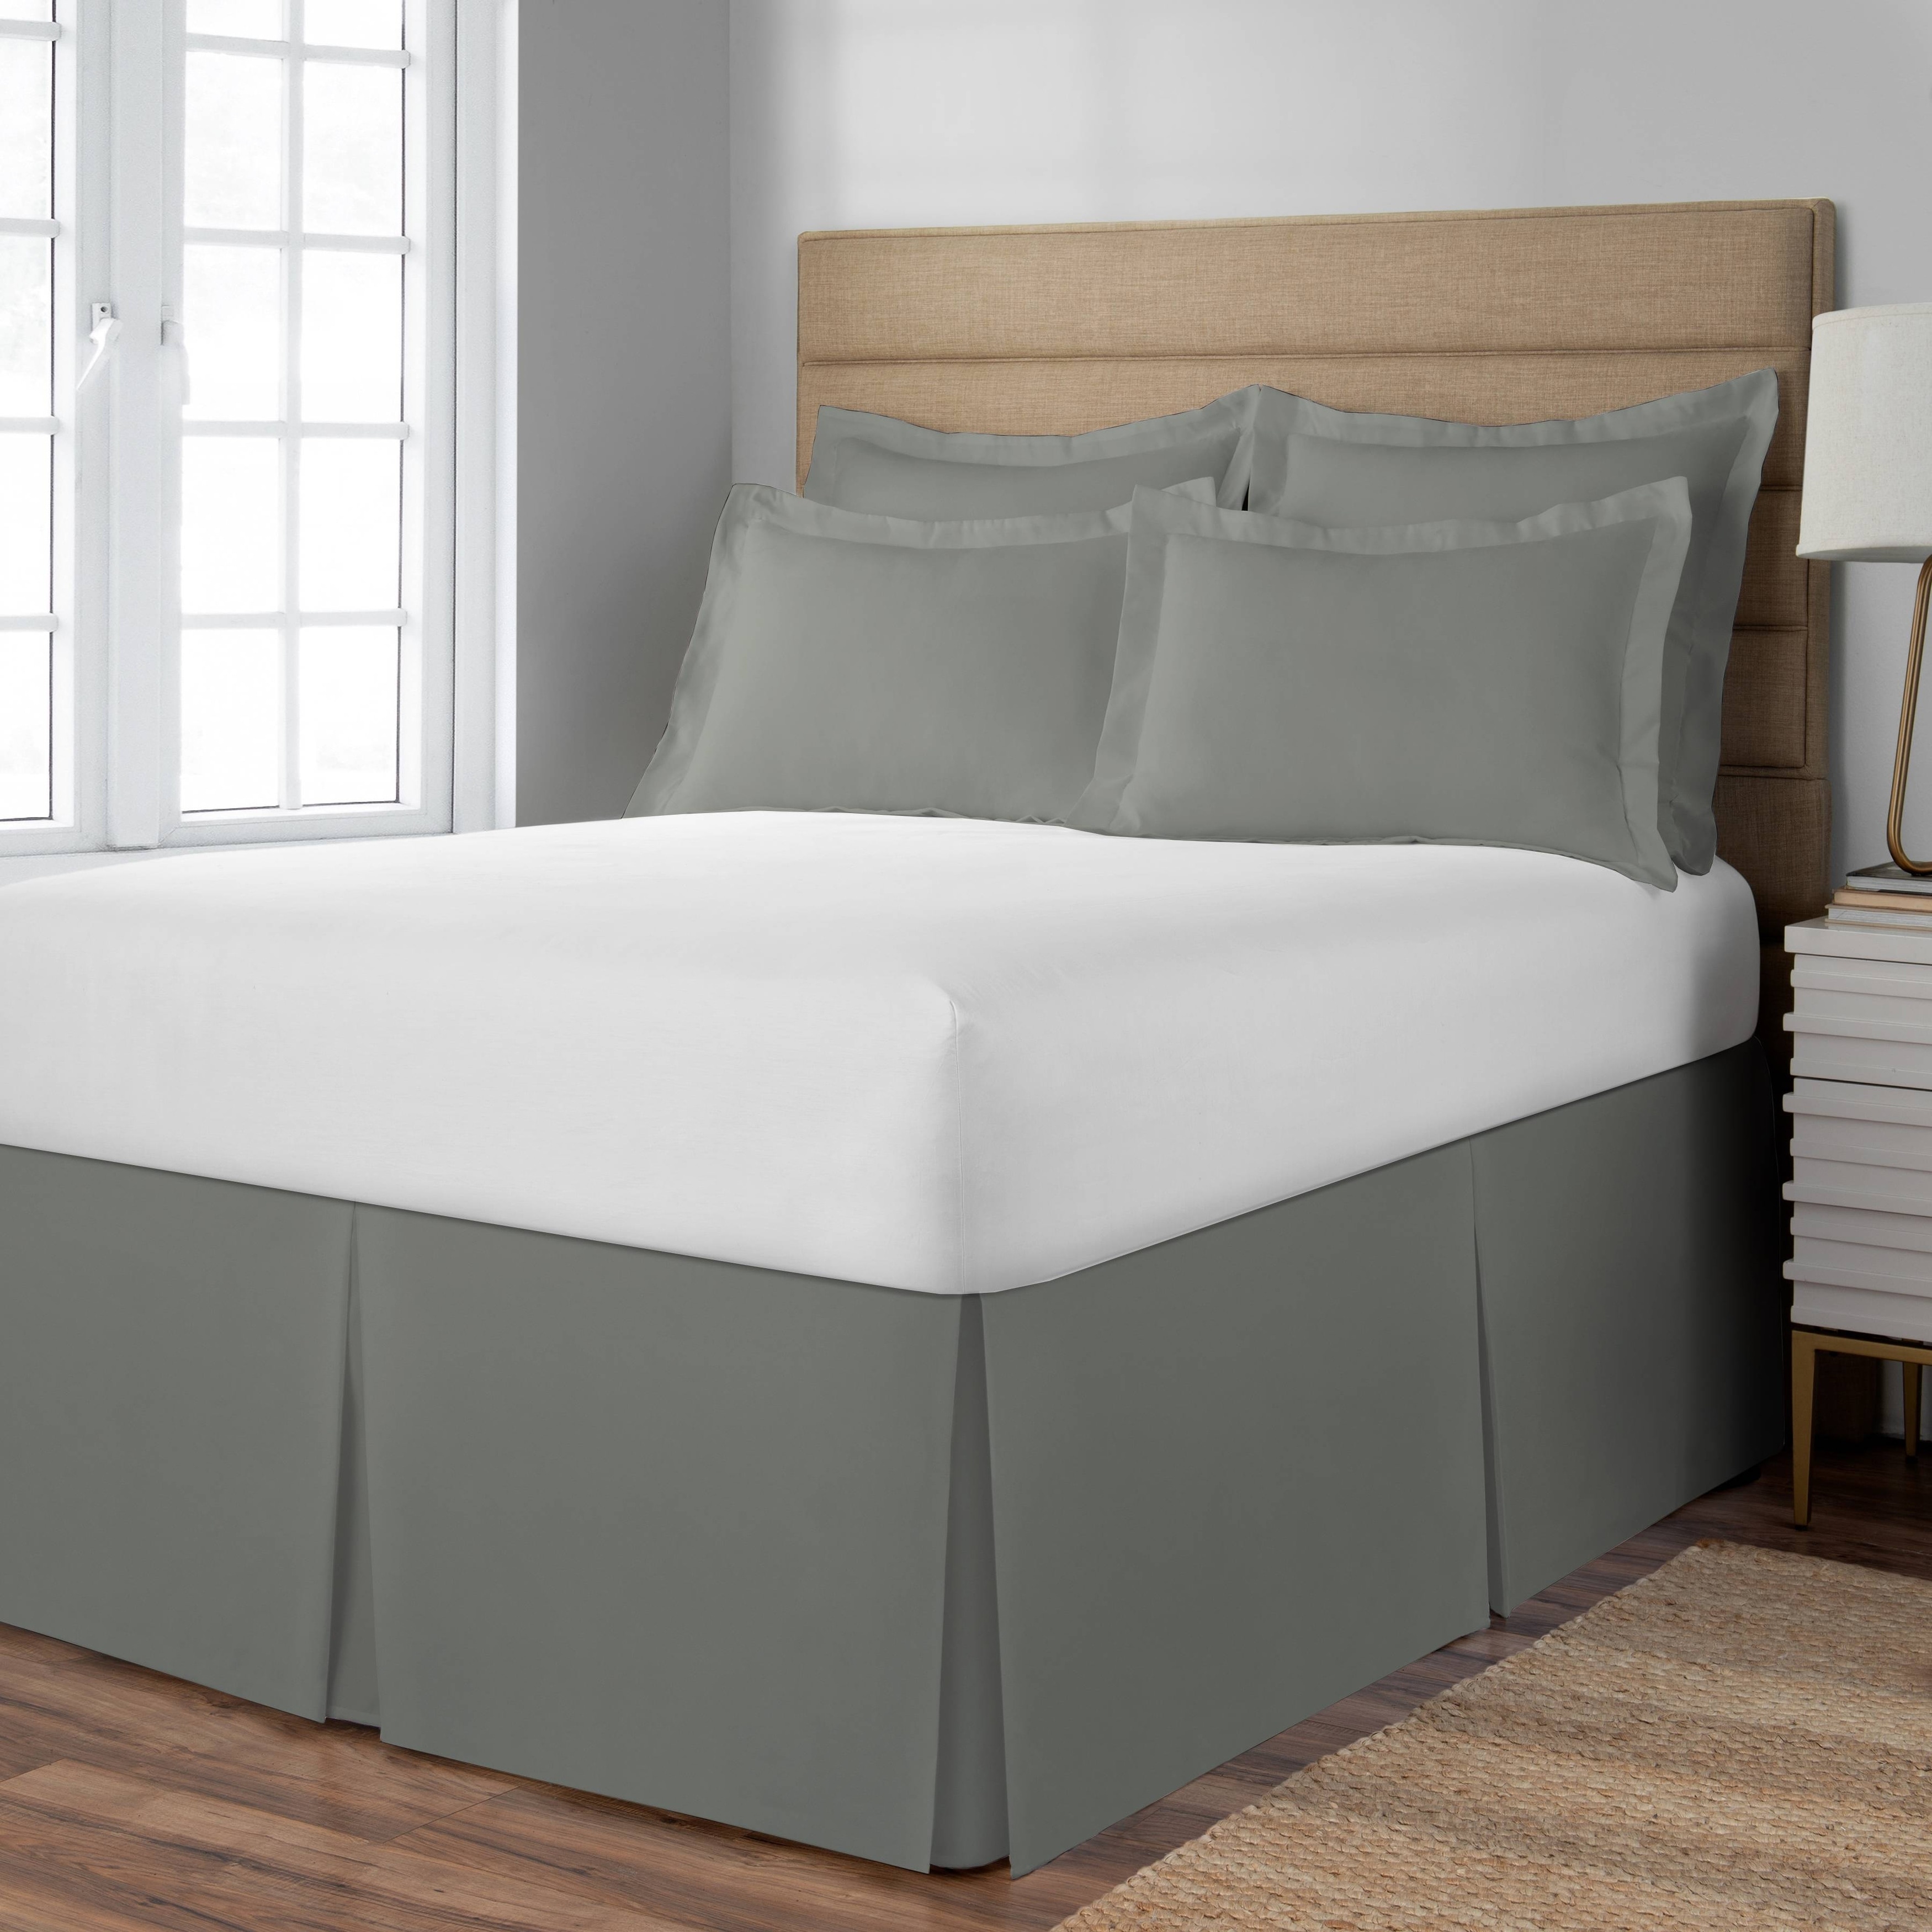 bed skirt king 12 inch drop